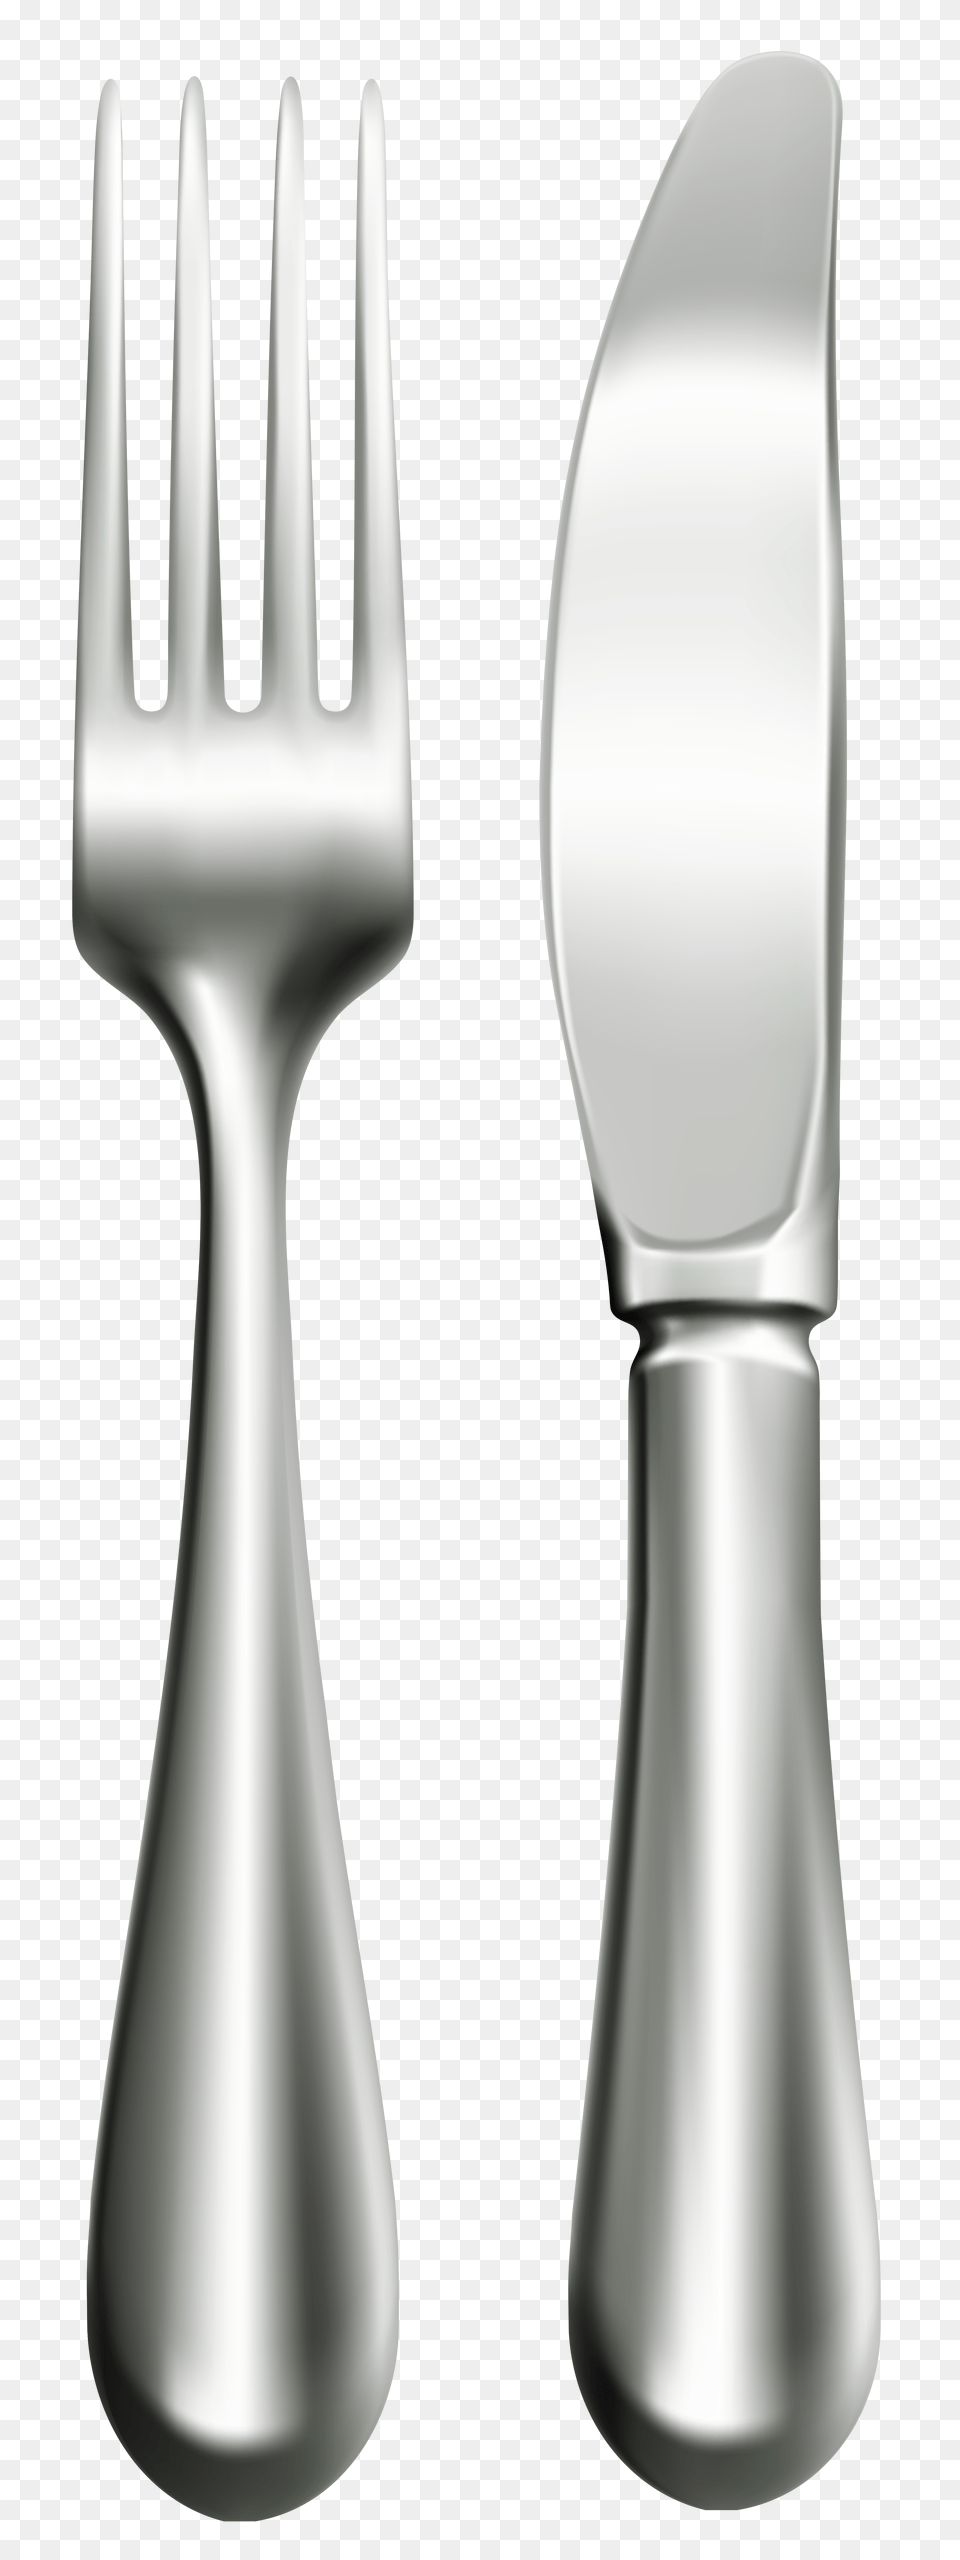 Fork And Knife Clip Art, Cutlery, Spoon, Smoke Pipe Png